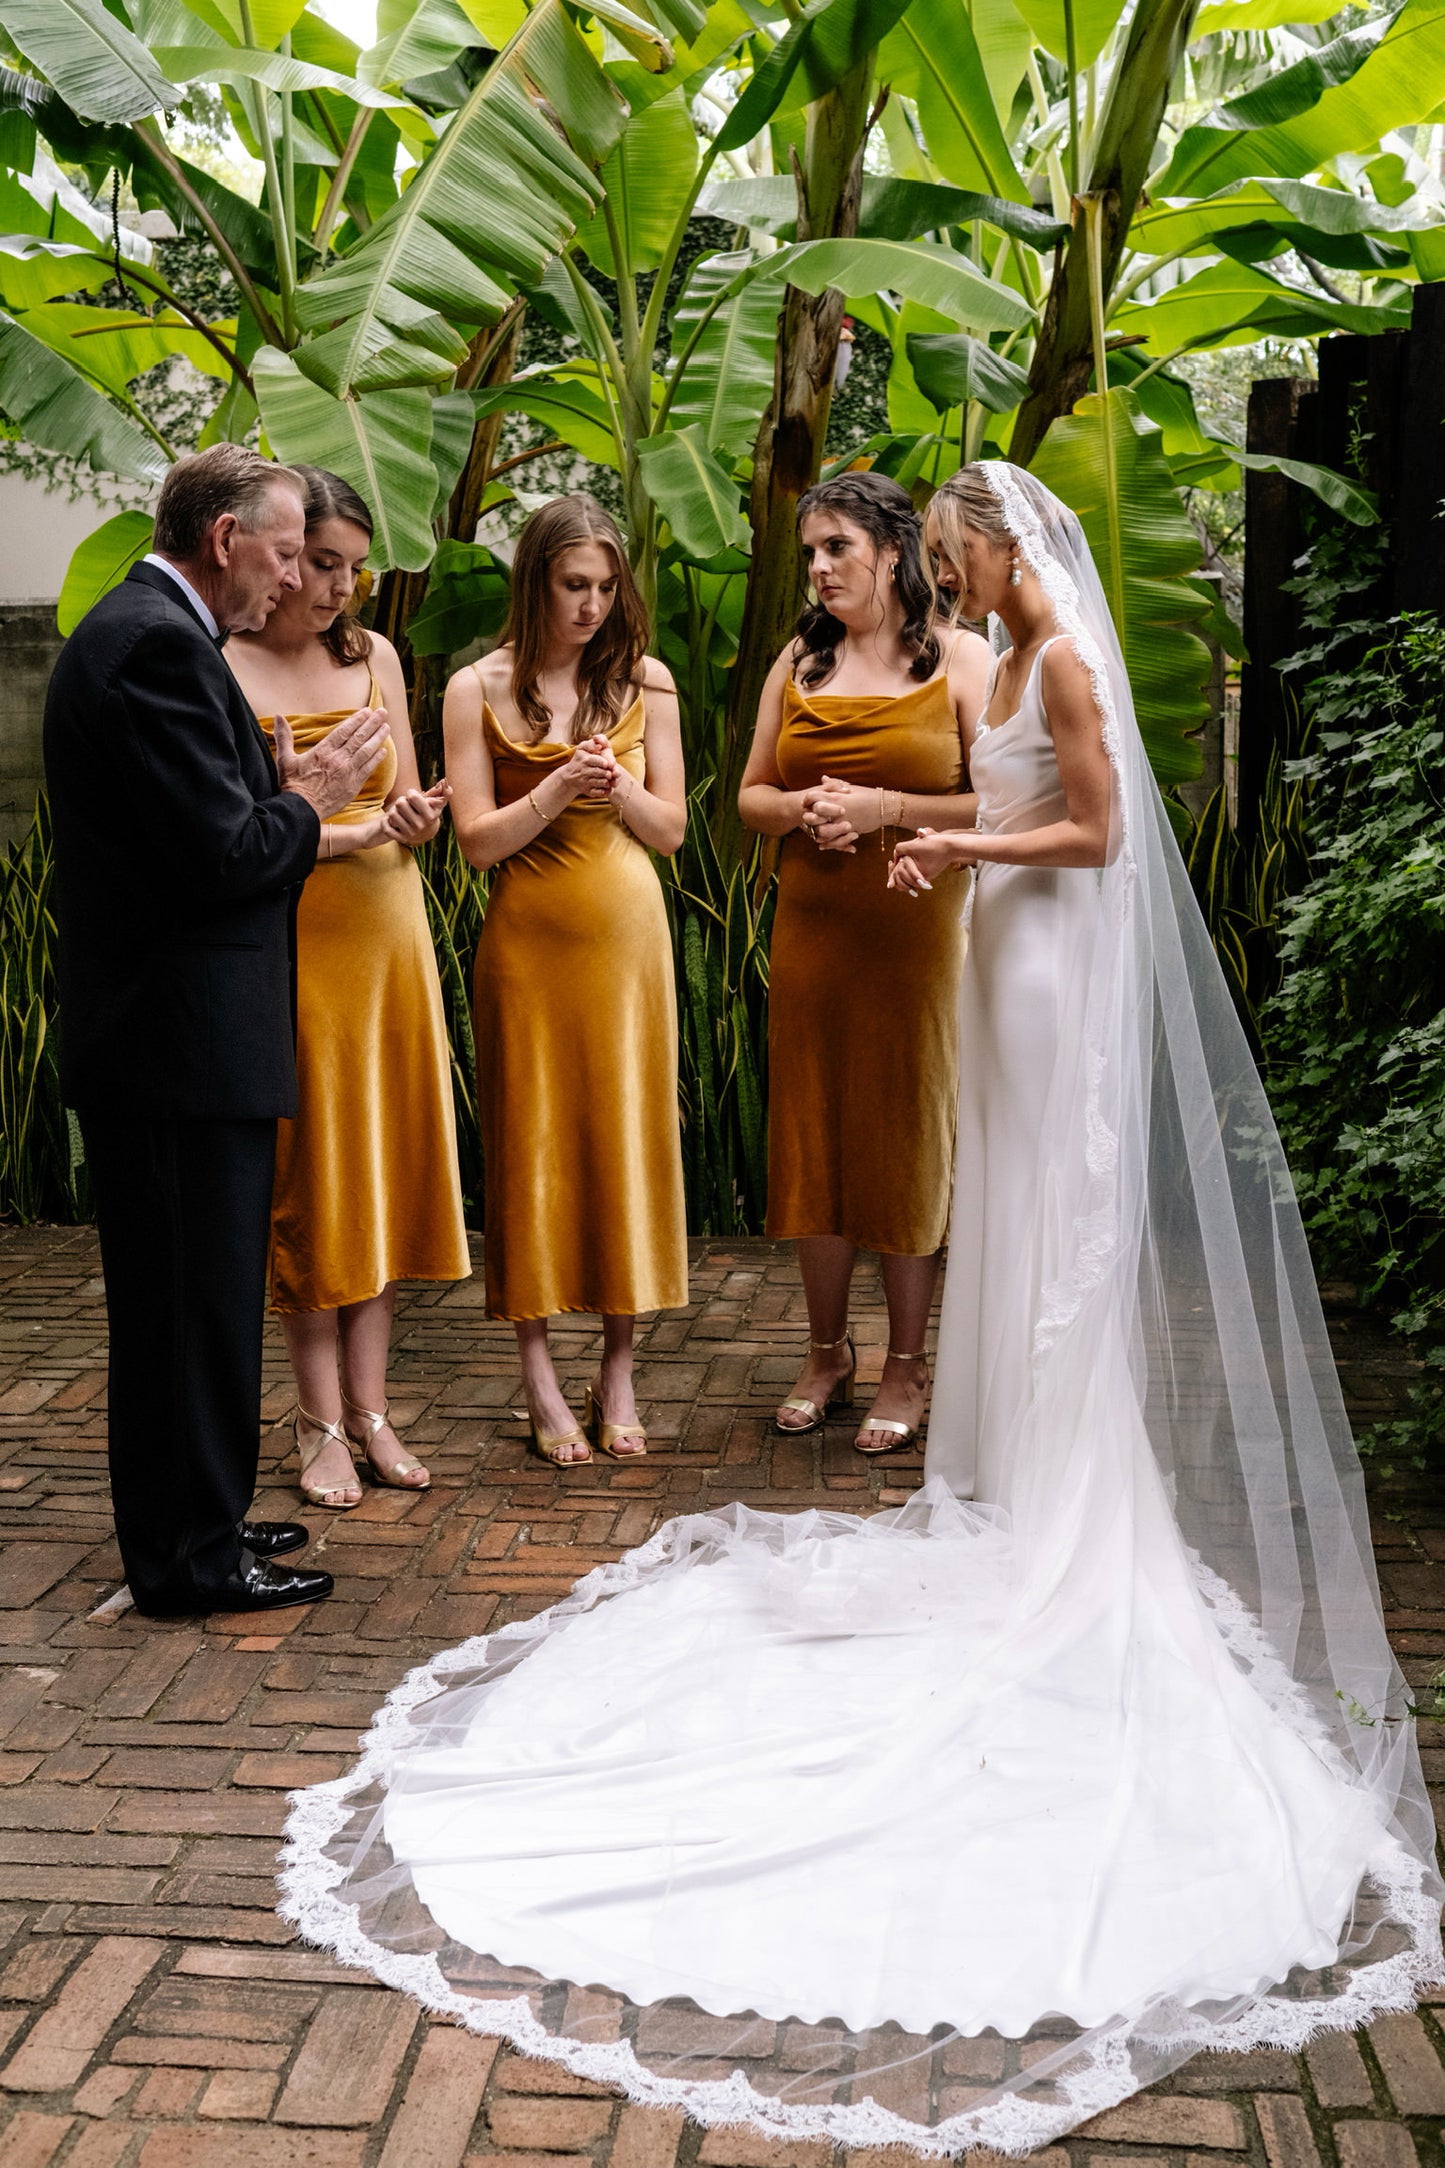 hacienda wedding as minimalist bride in long cathedral bridal veil with lace edge pray with the bridesmaids 